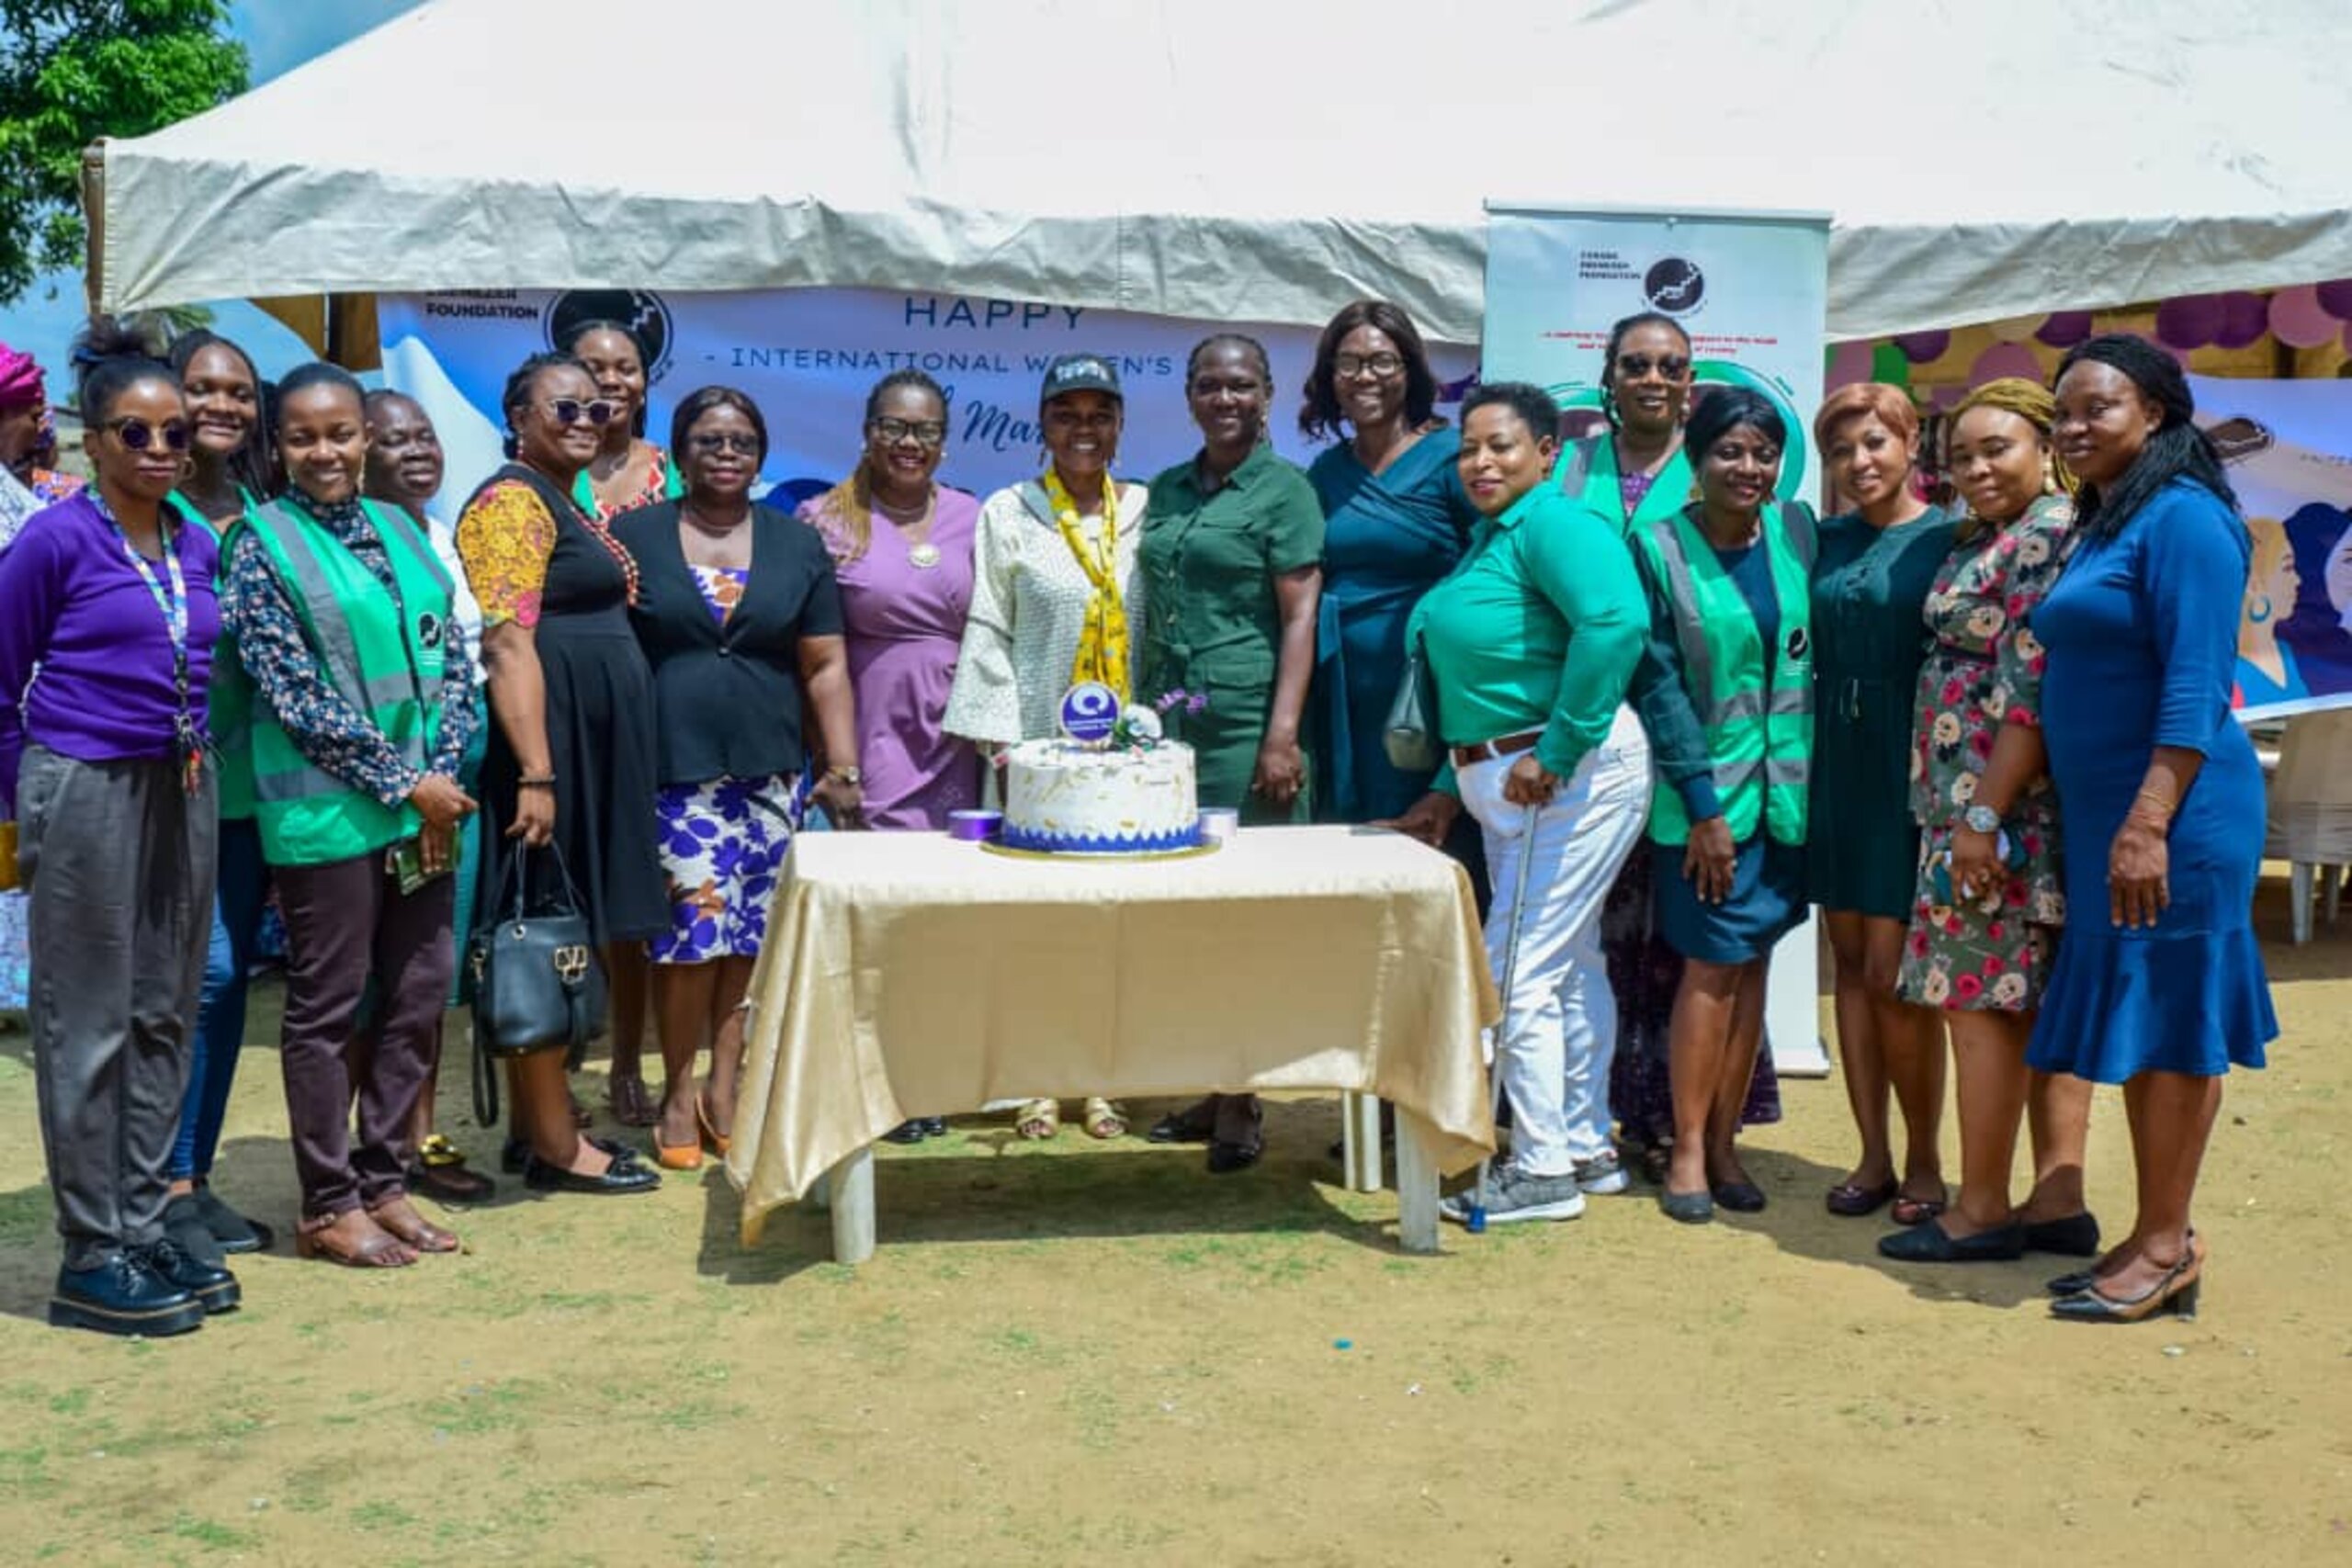 Cakasa Champions Gender Equality and Women’s Empowerment on International Women’s Day in Lagos